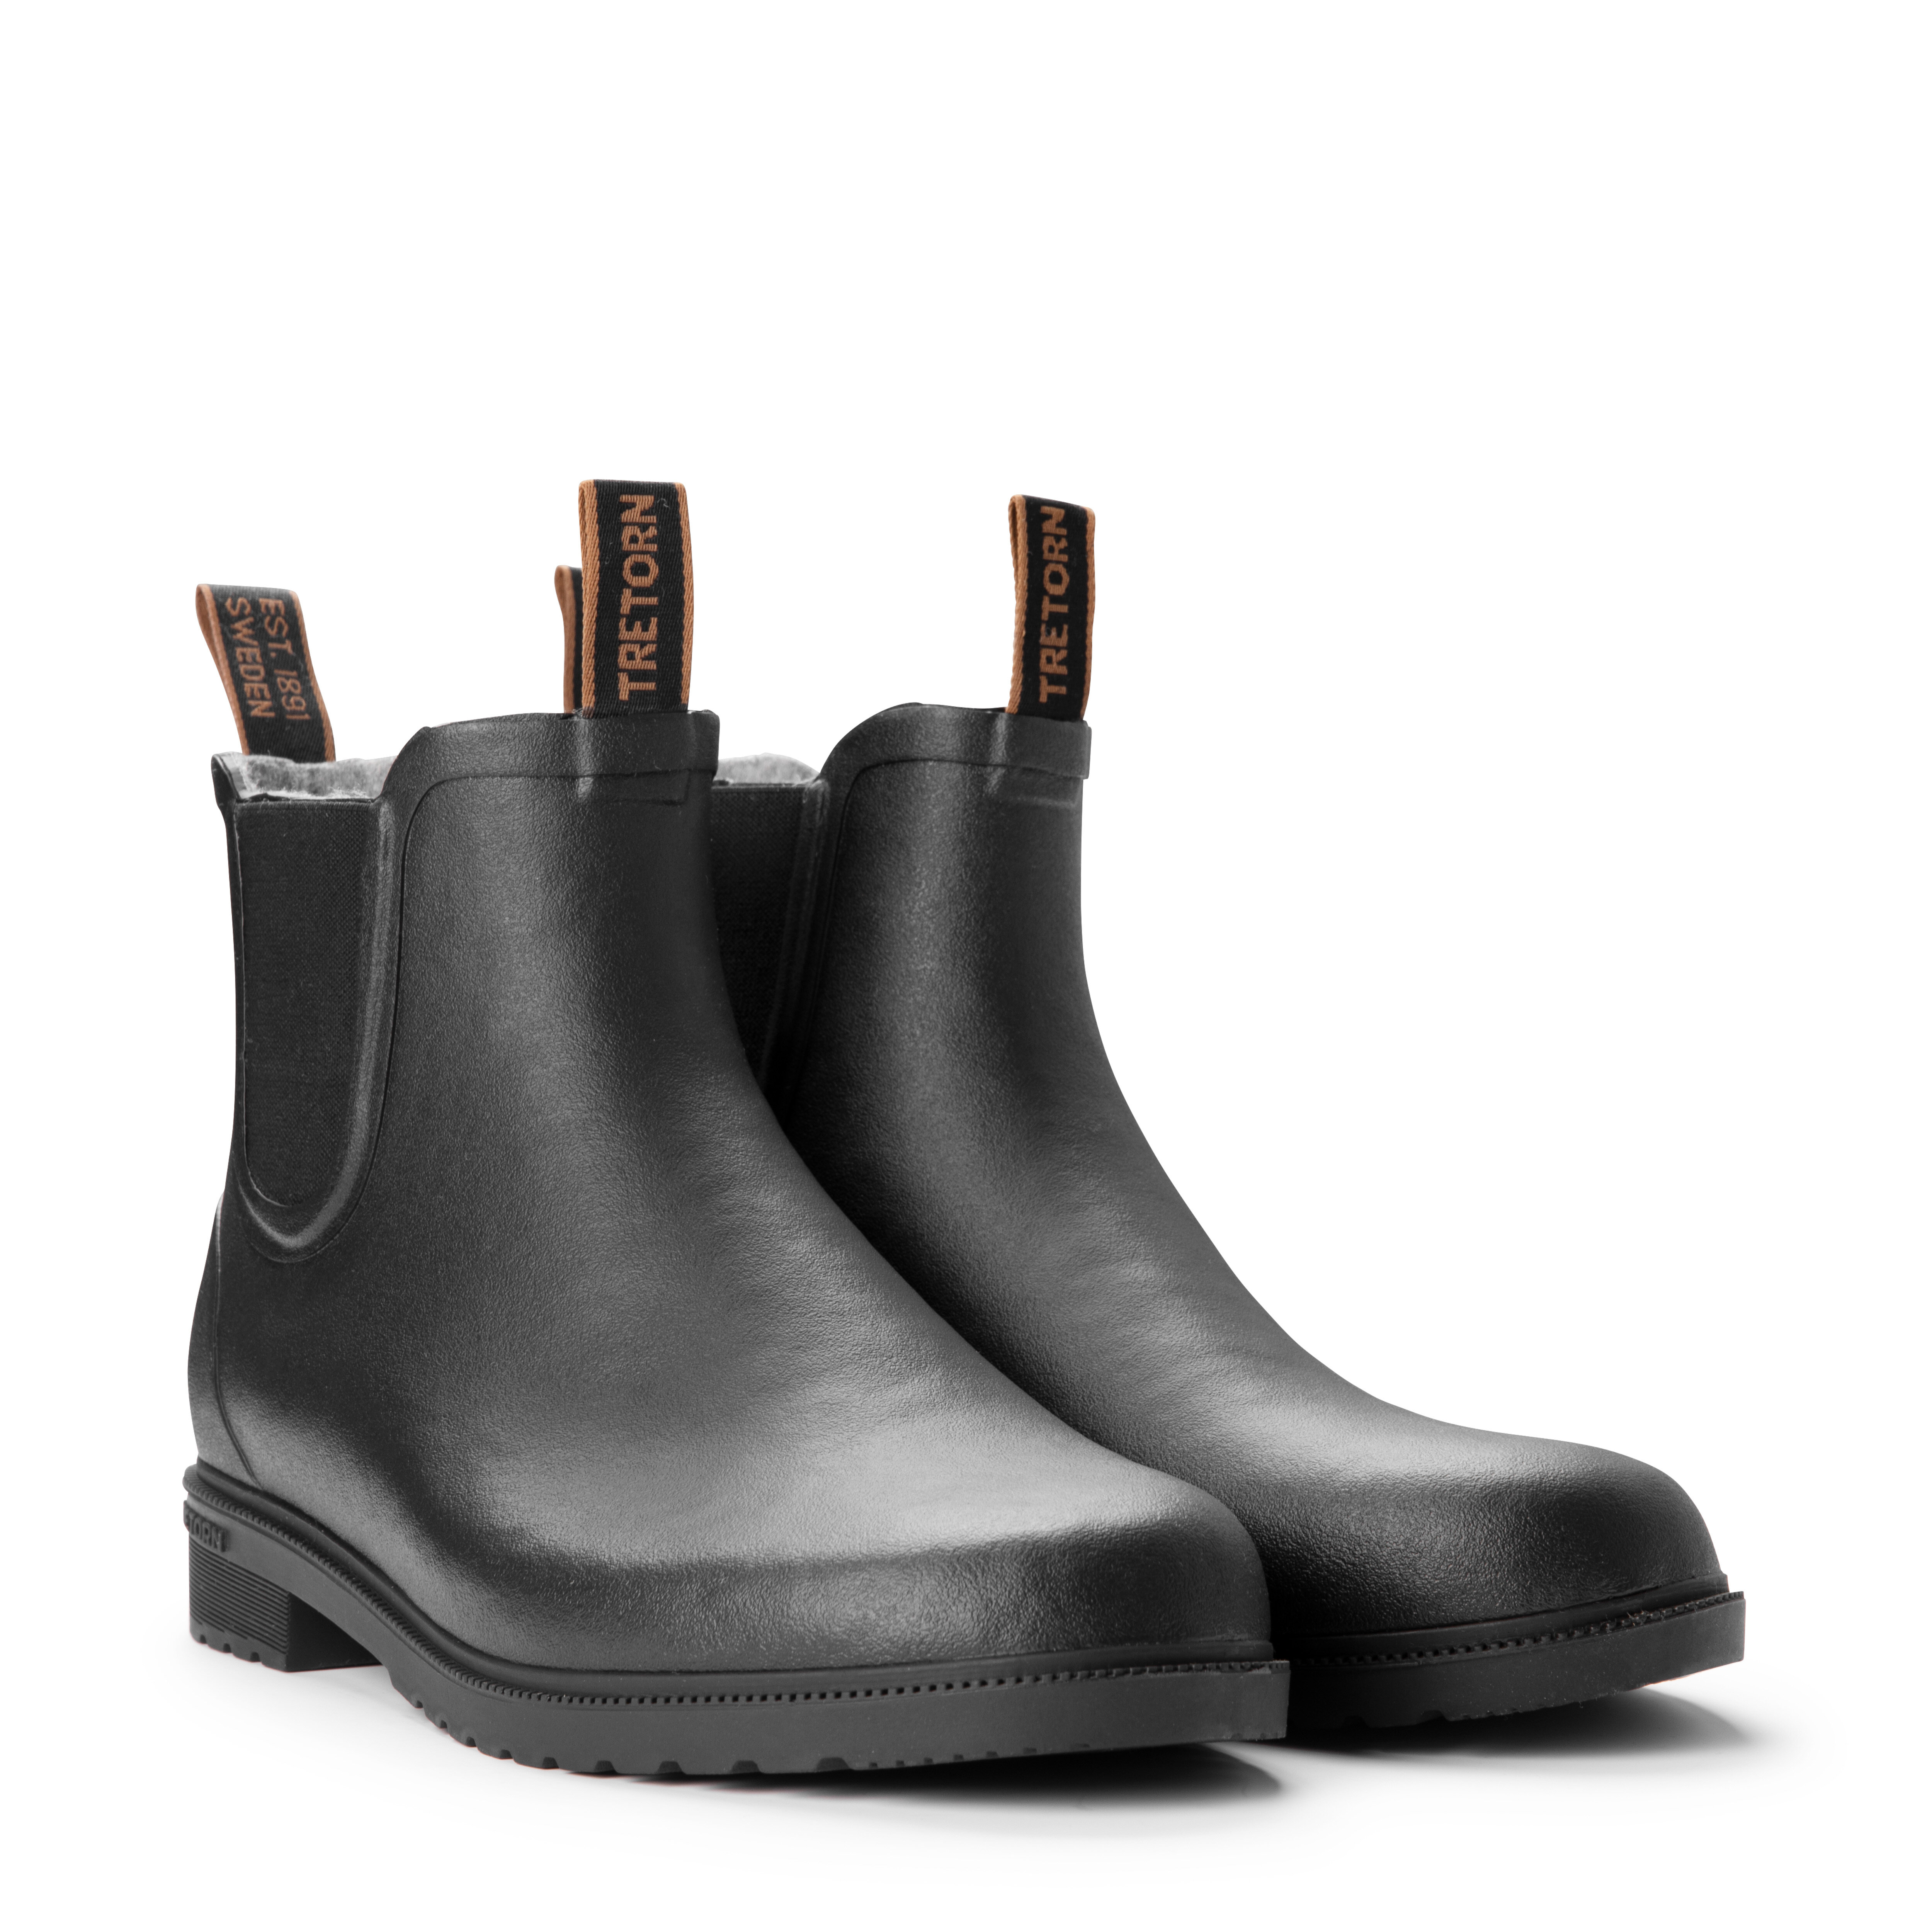 Chelsea Classic Wool Rubber Boots by Tretorn for men and women in the colour black